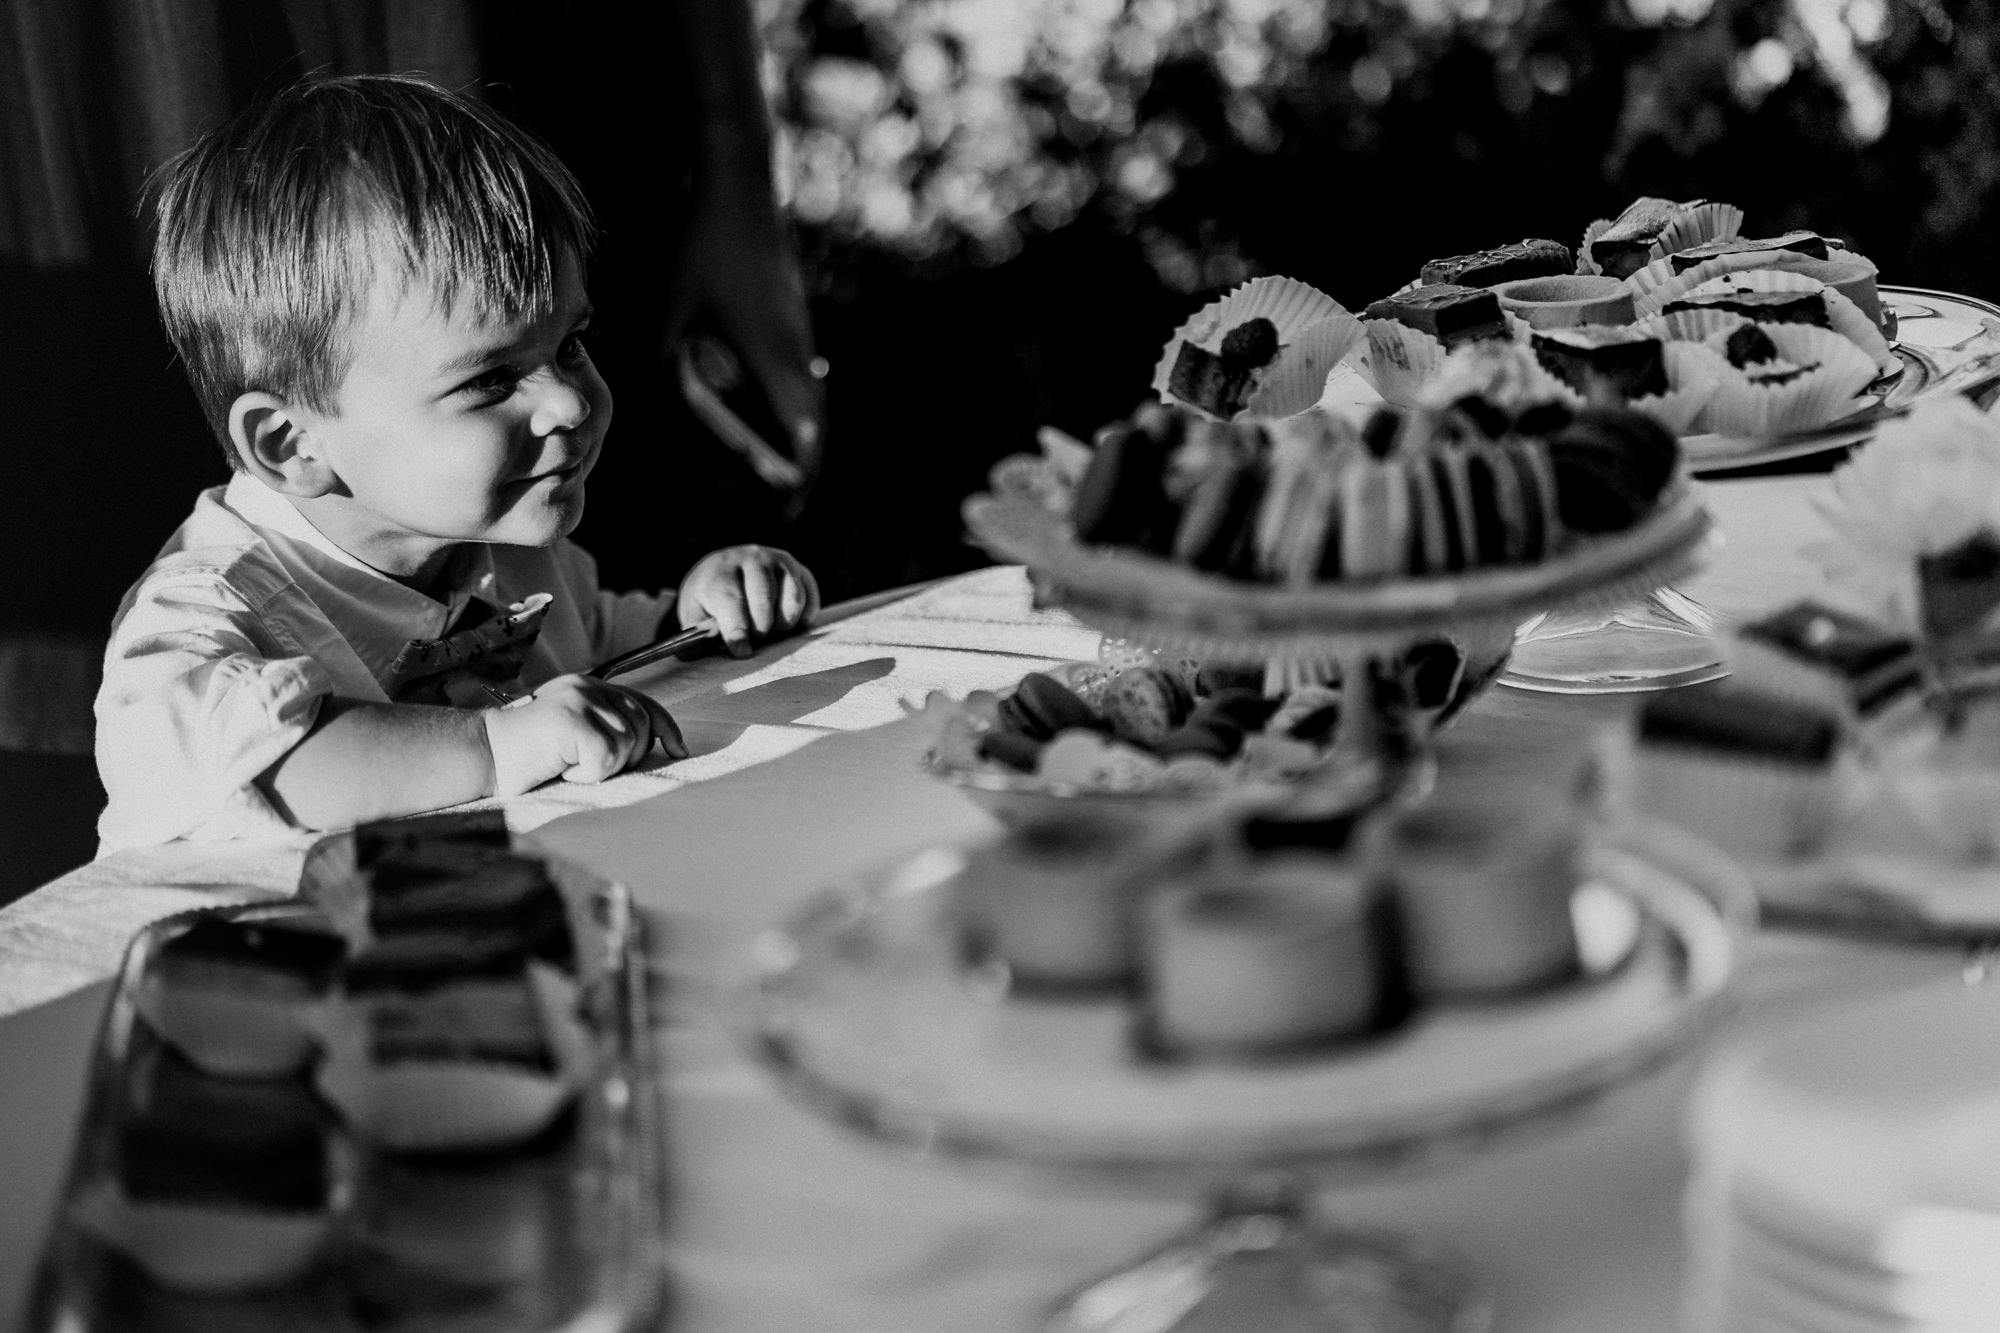 A young guest eyes the dessert table